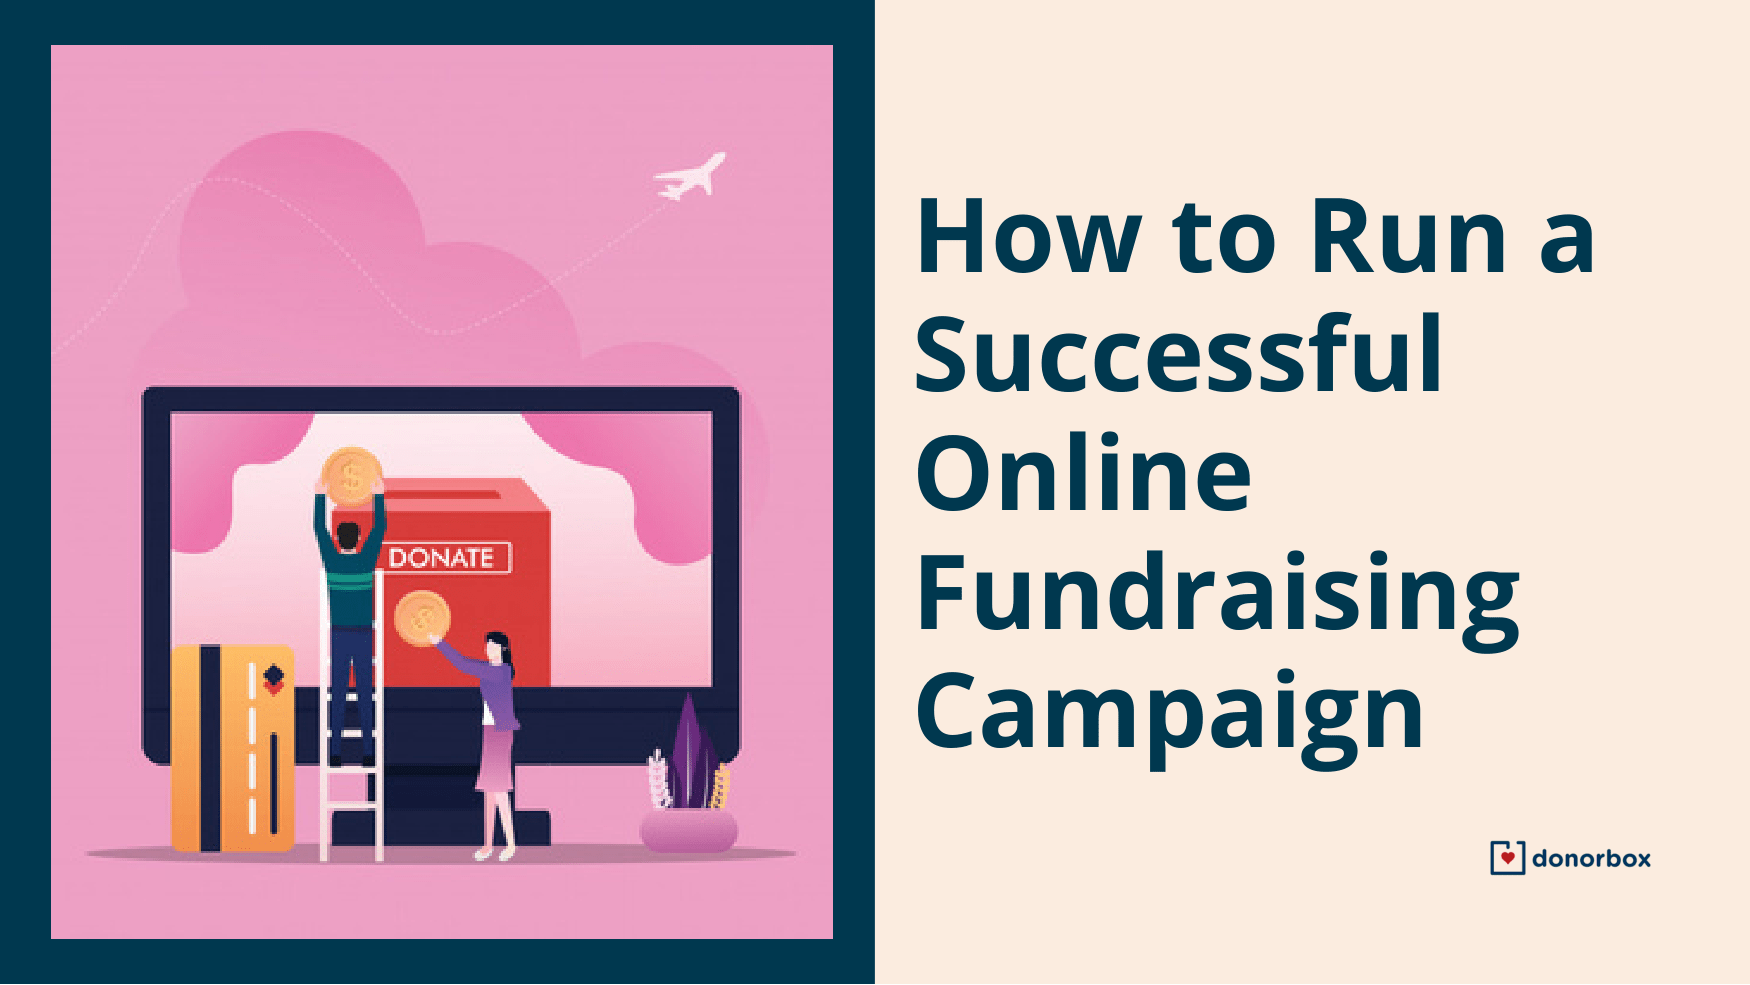 How to Start a Fundraiser & Run Successful Online Fundraising Campaign